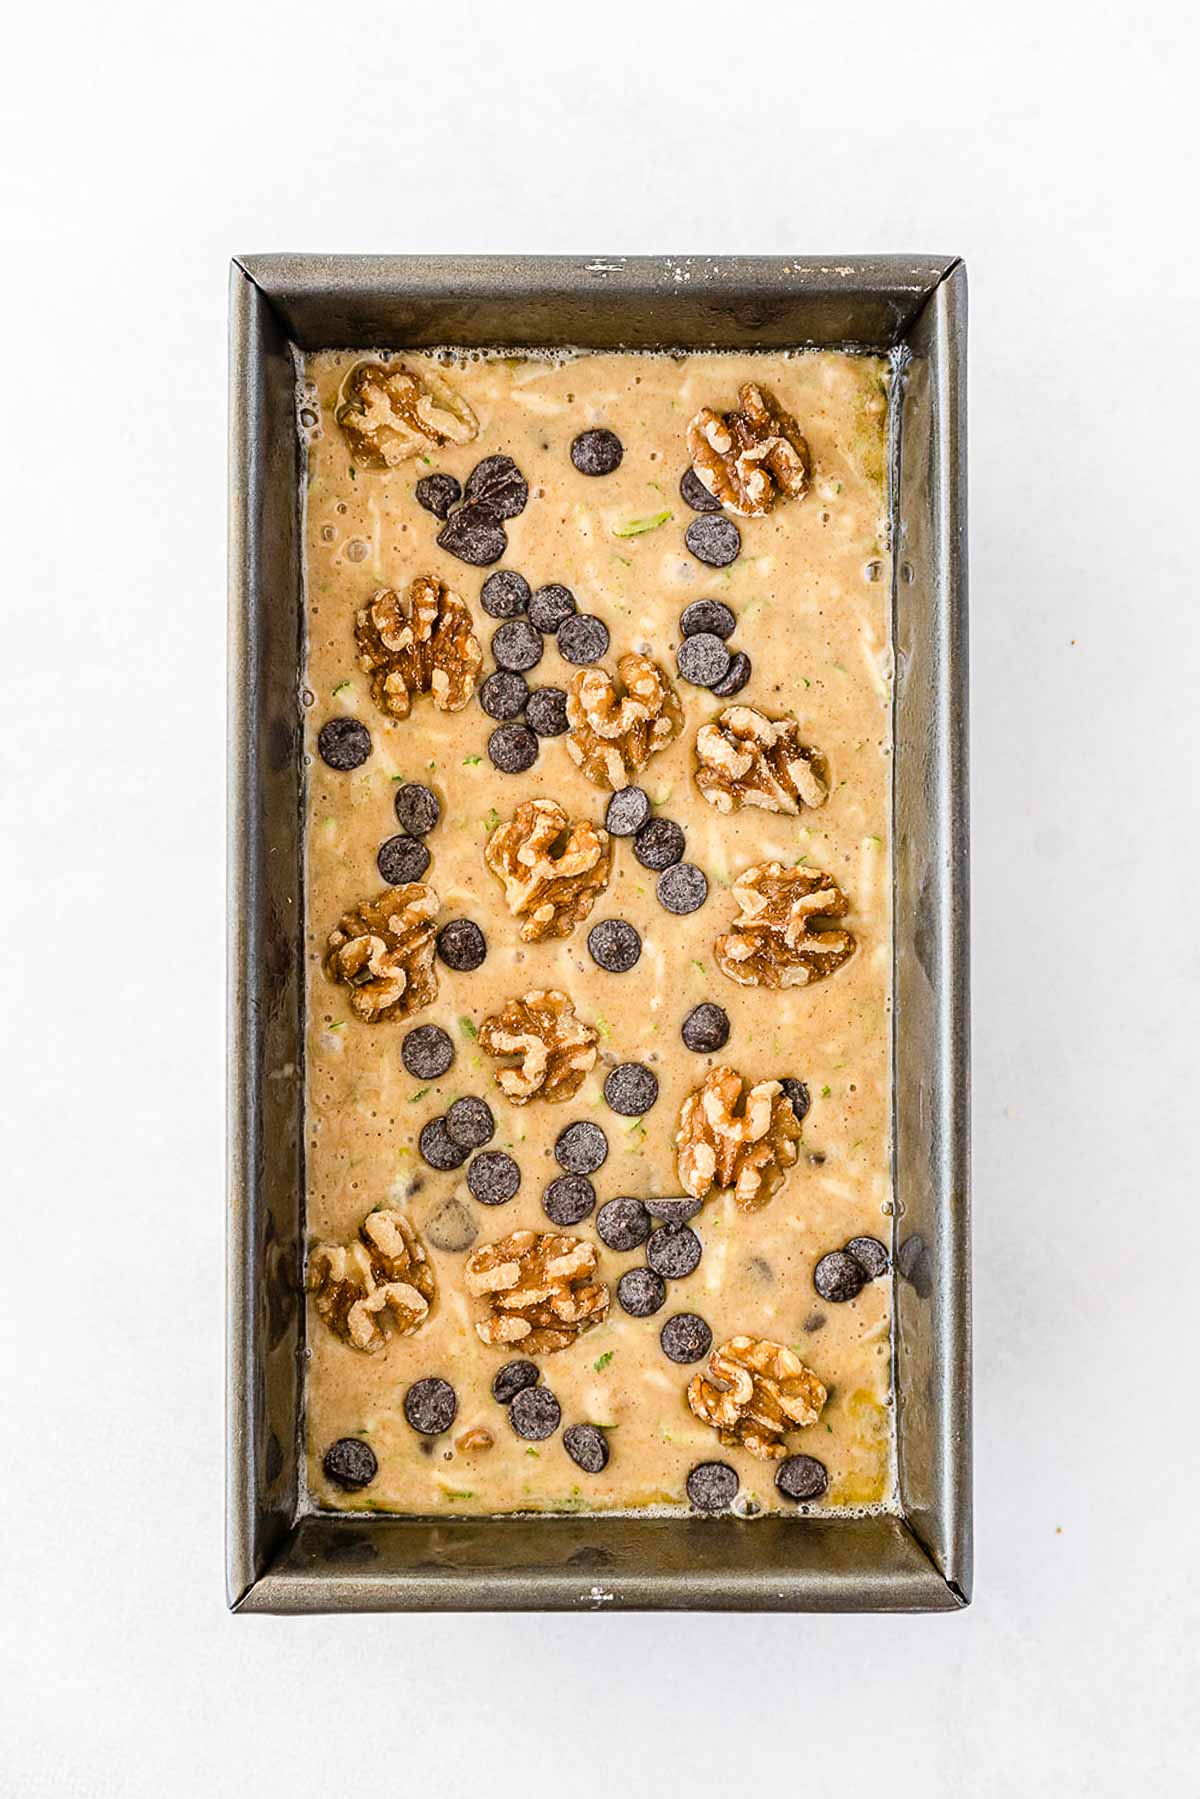 zucchini bread batter topped with chocolate chips and chopped walnuts in a silver loaf pan